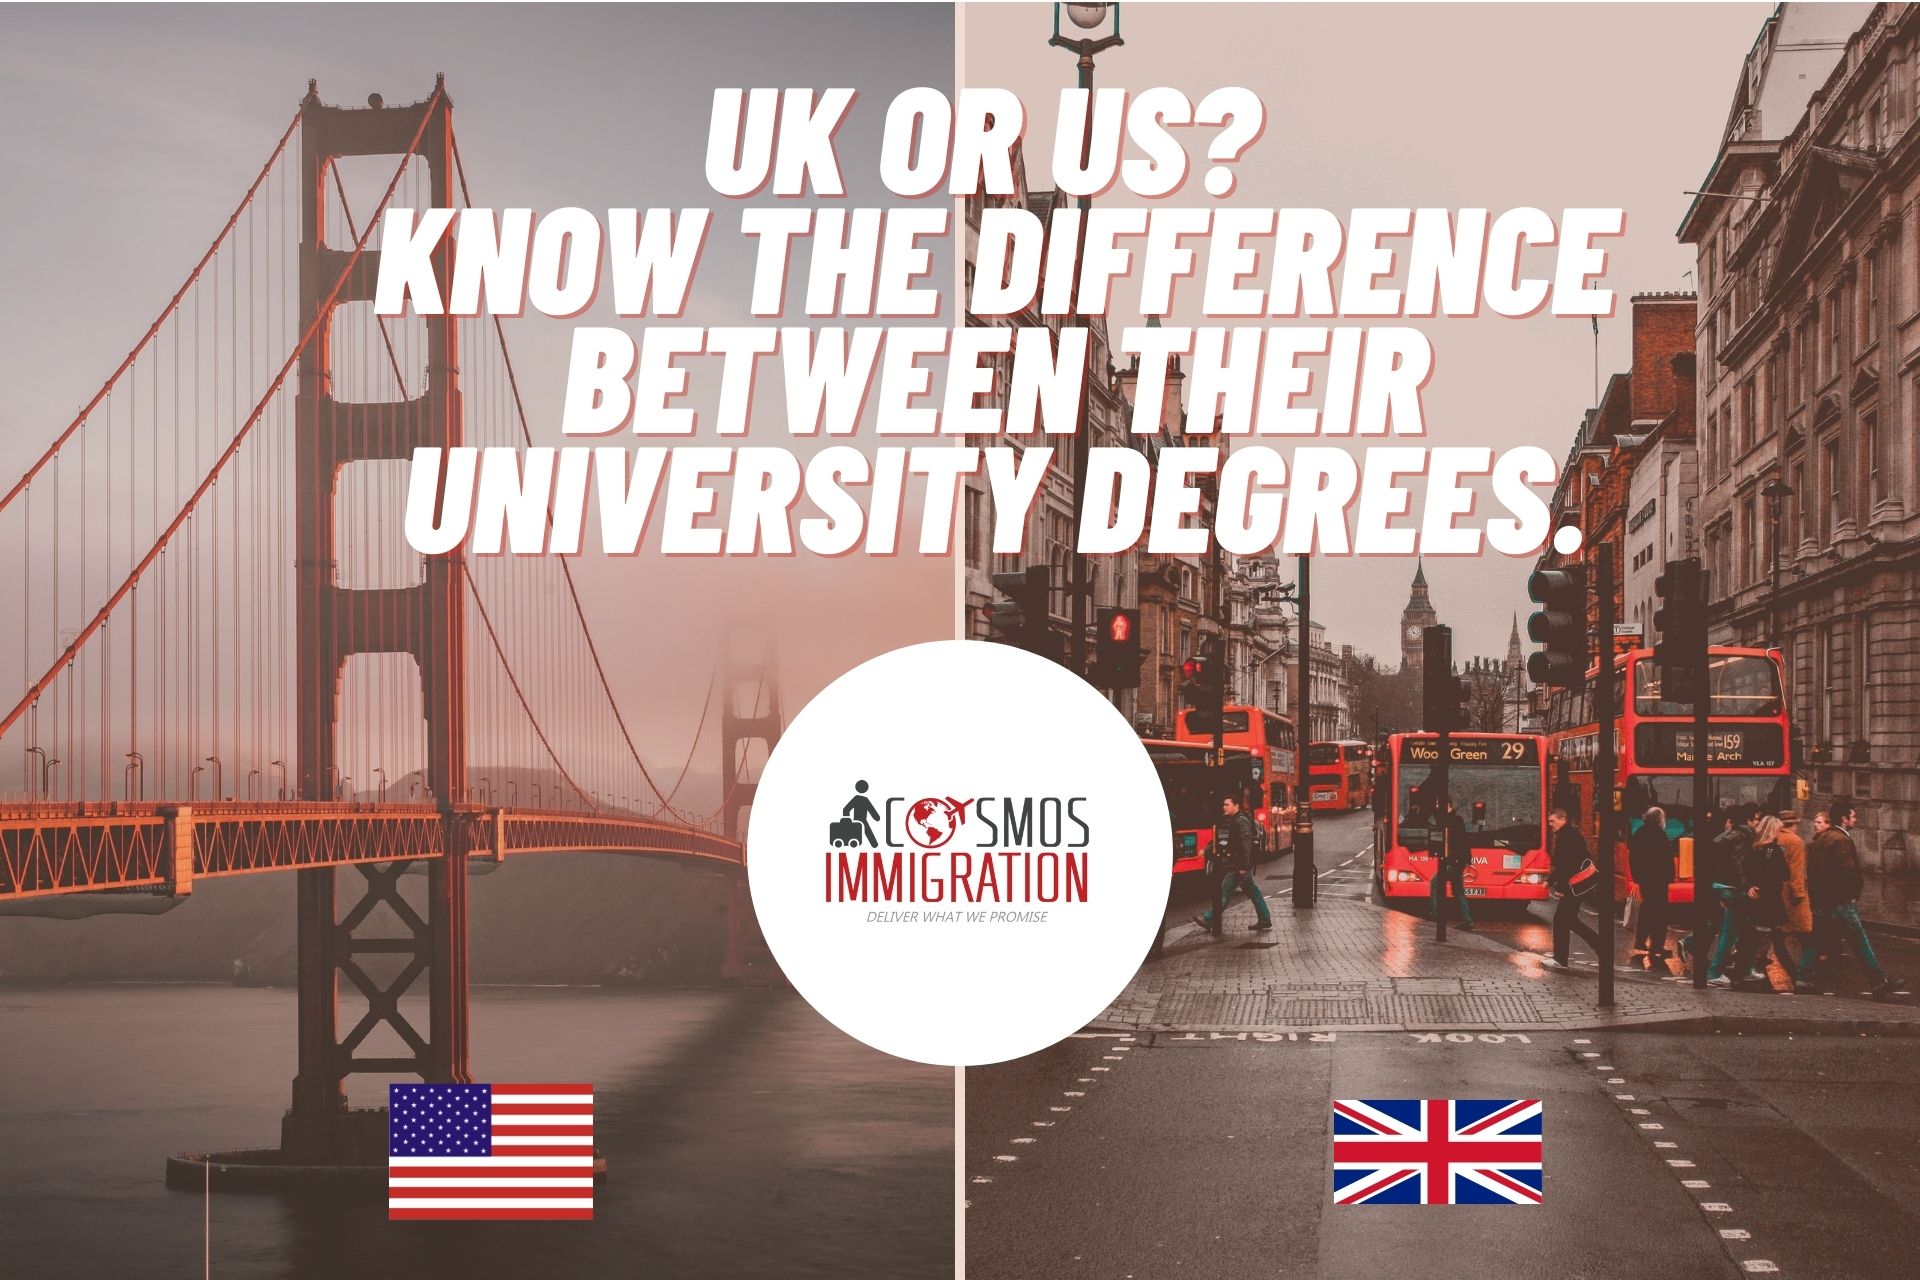 US Or UK For Education